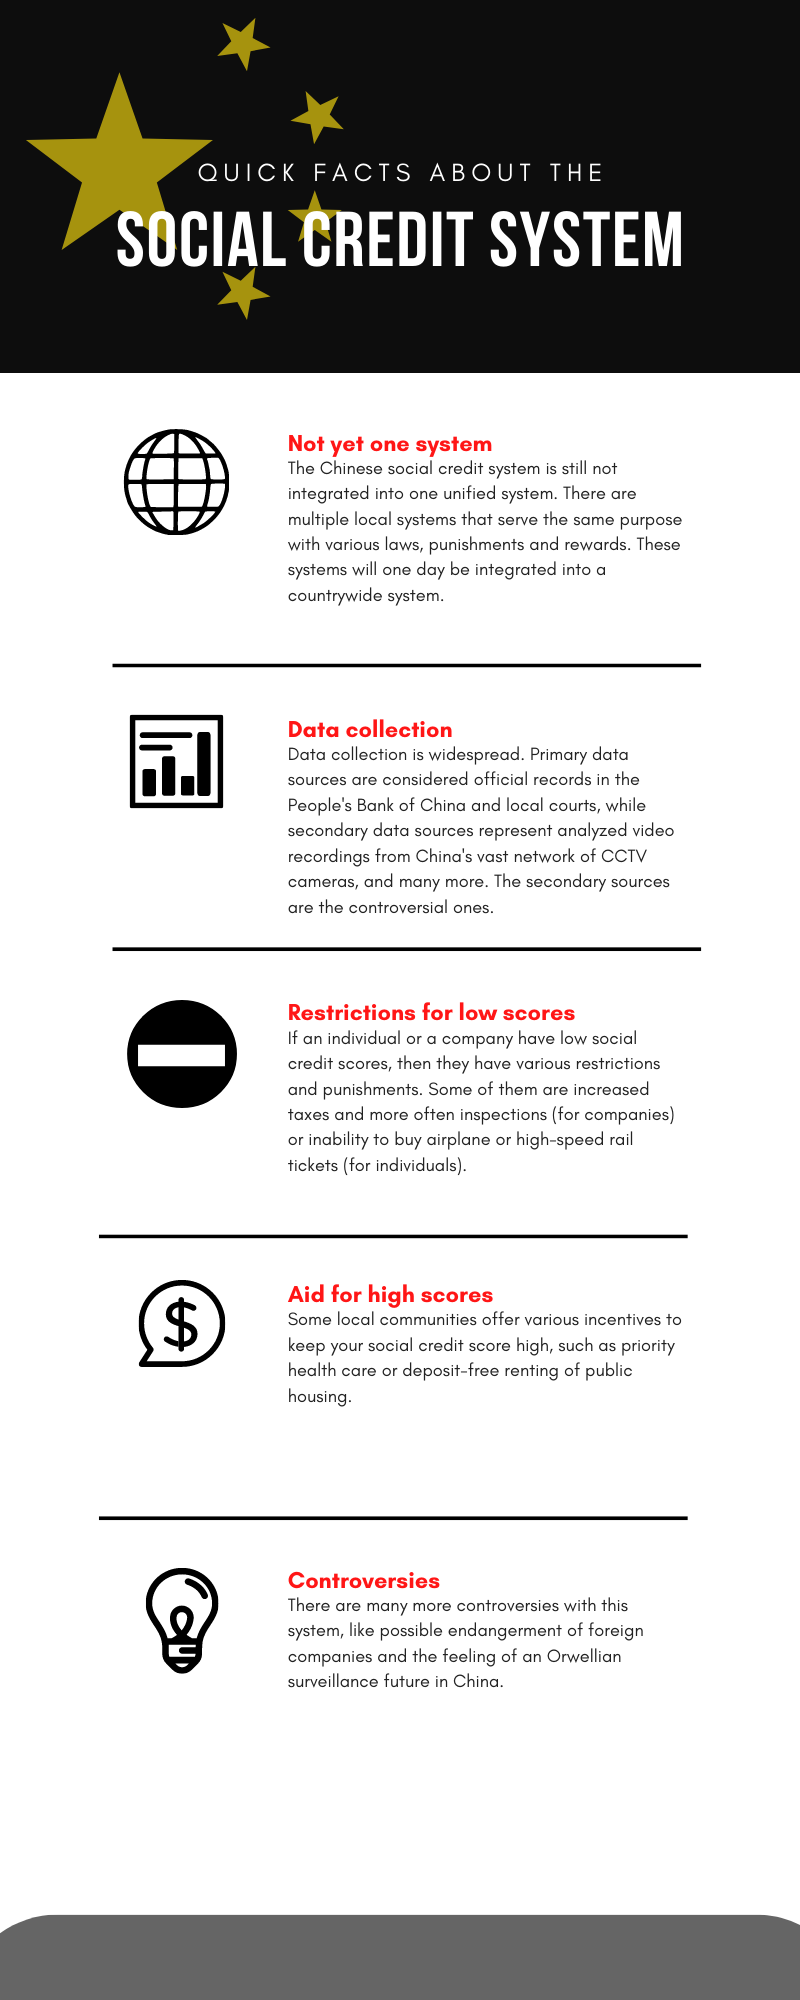 Infographic showing 6 different aspects of the Chinese social credit system